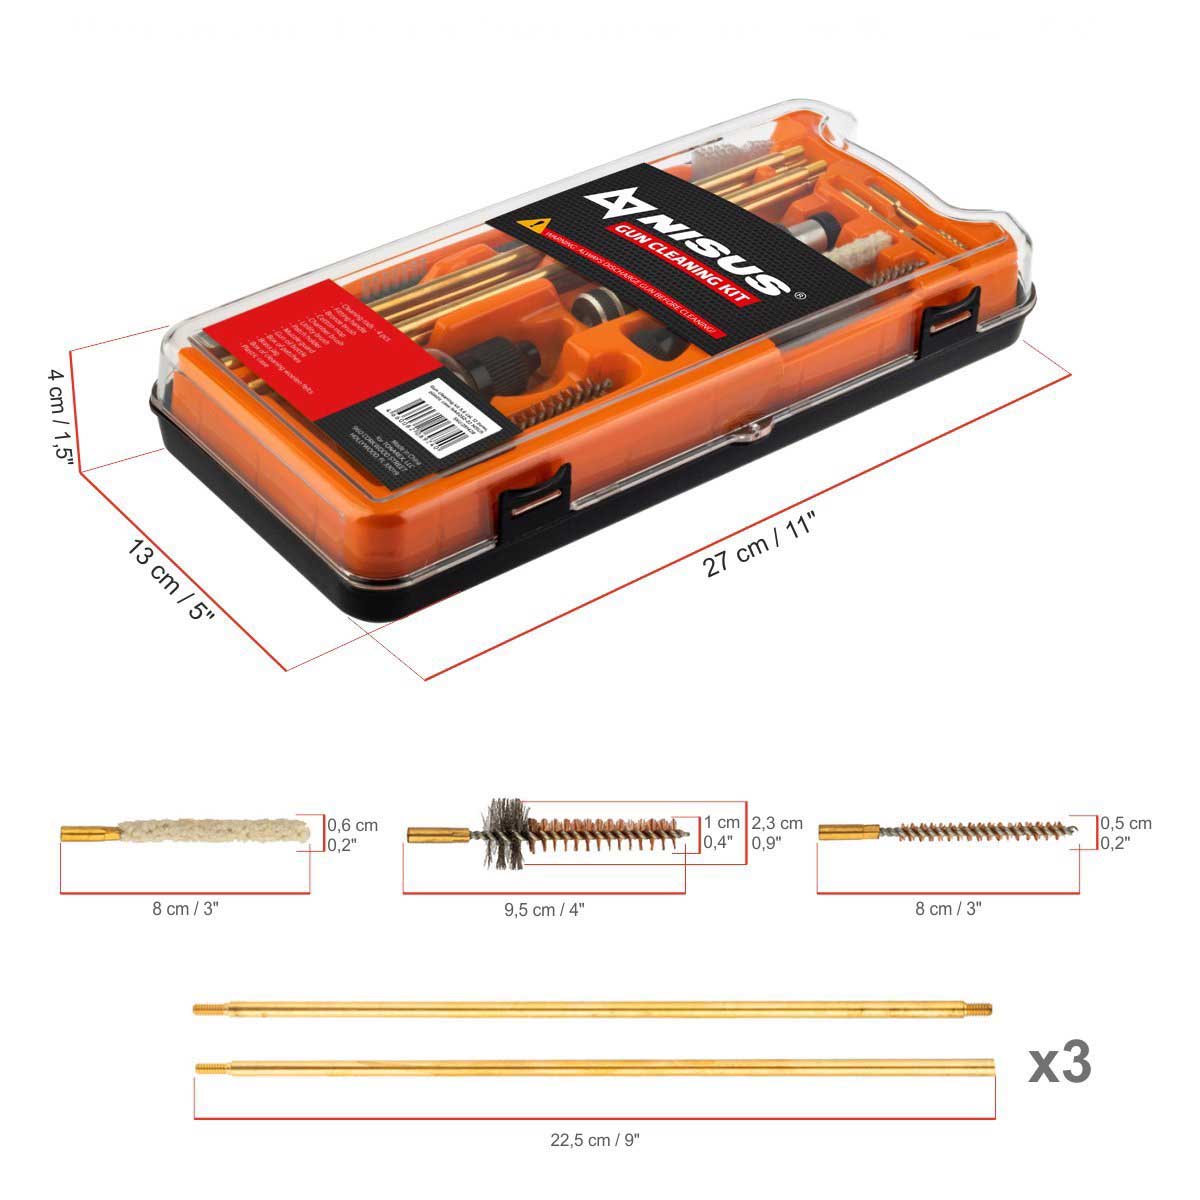 Gun Cleaning Kit, 12 Items, .22 Caliber, Plastic Case is 11 inches long, 5 inches wide and 1.5 inches high